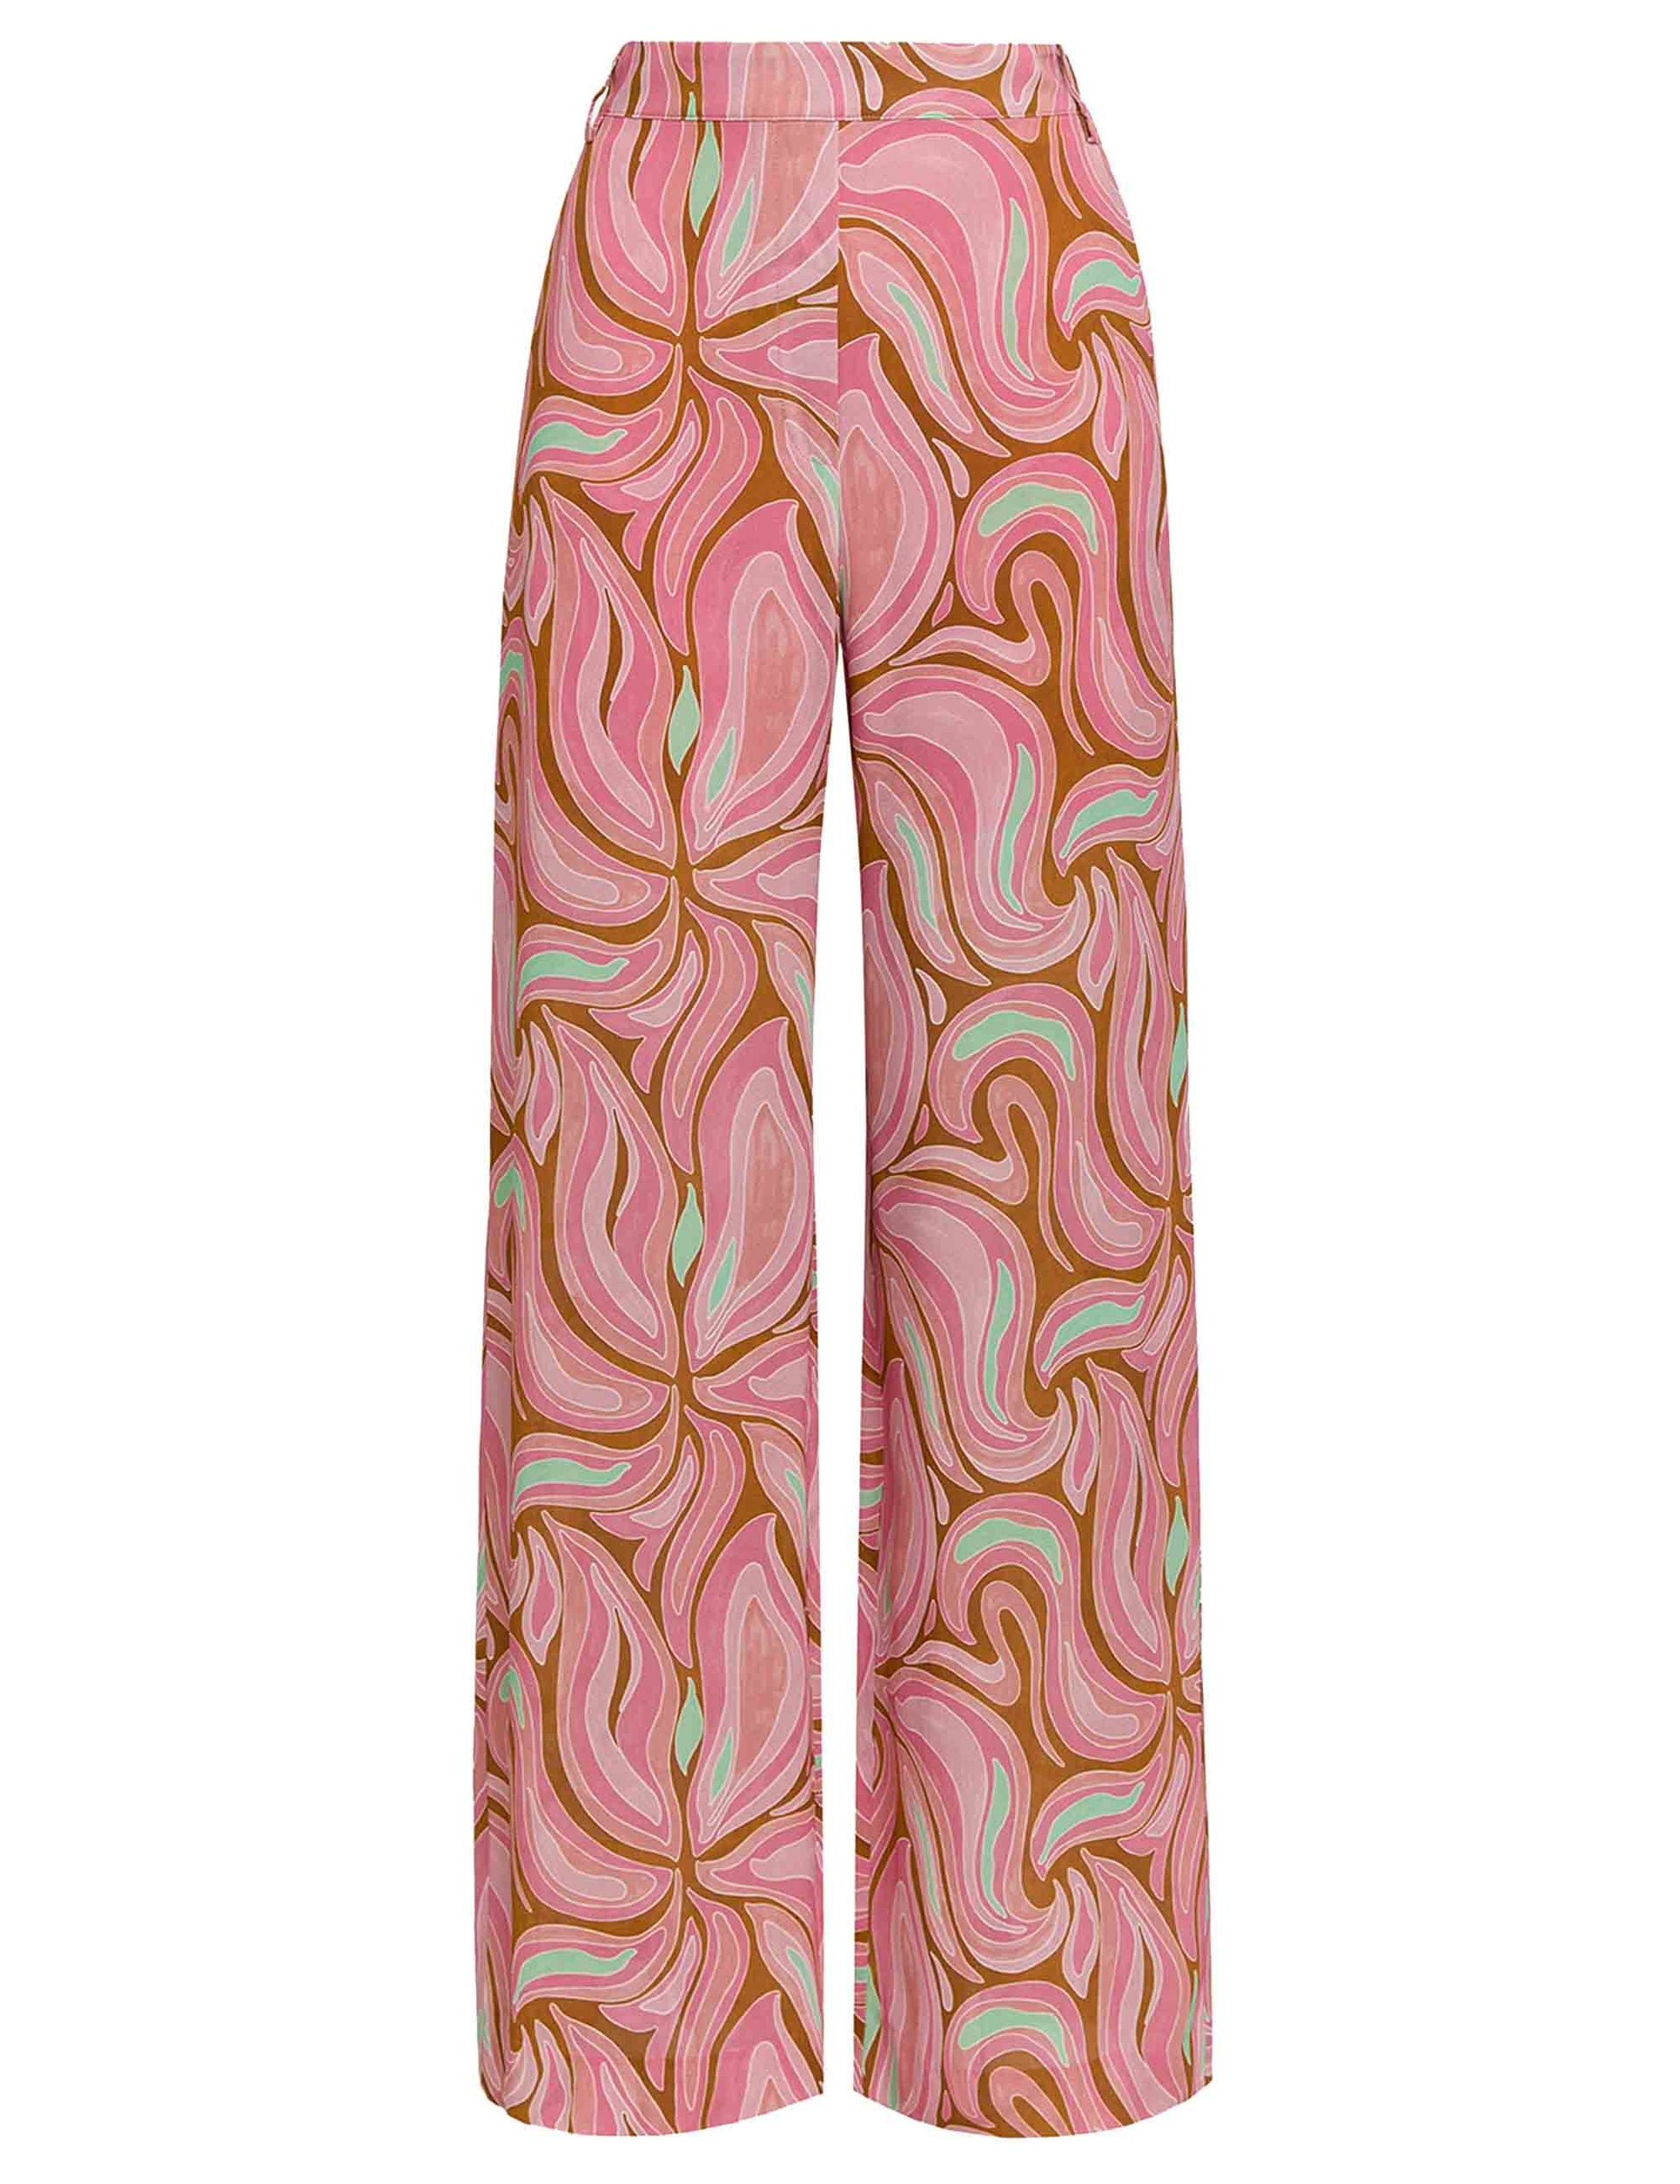 Marble Georgette women's trousers in pink viscose